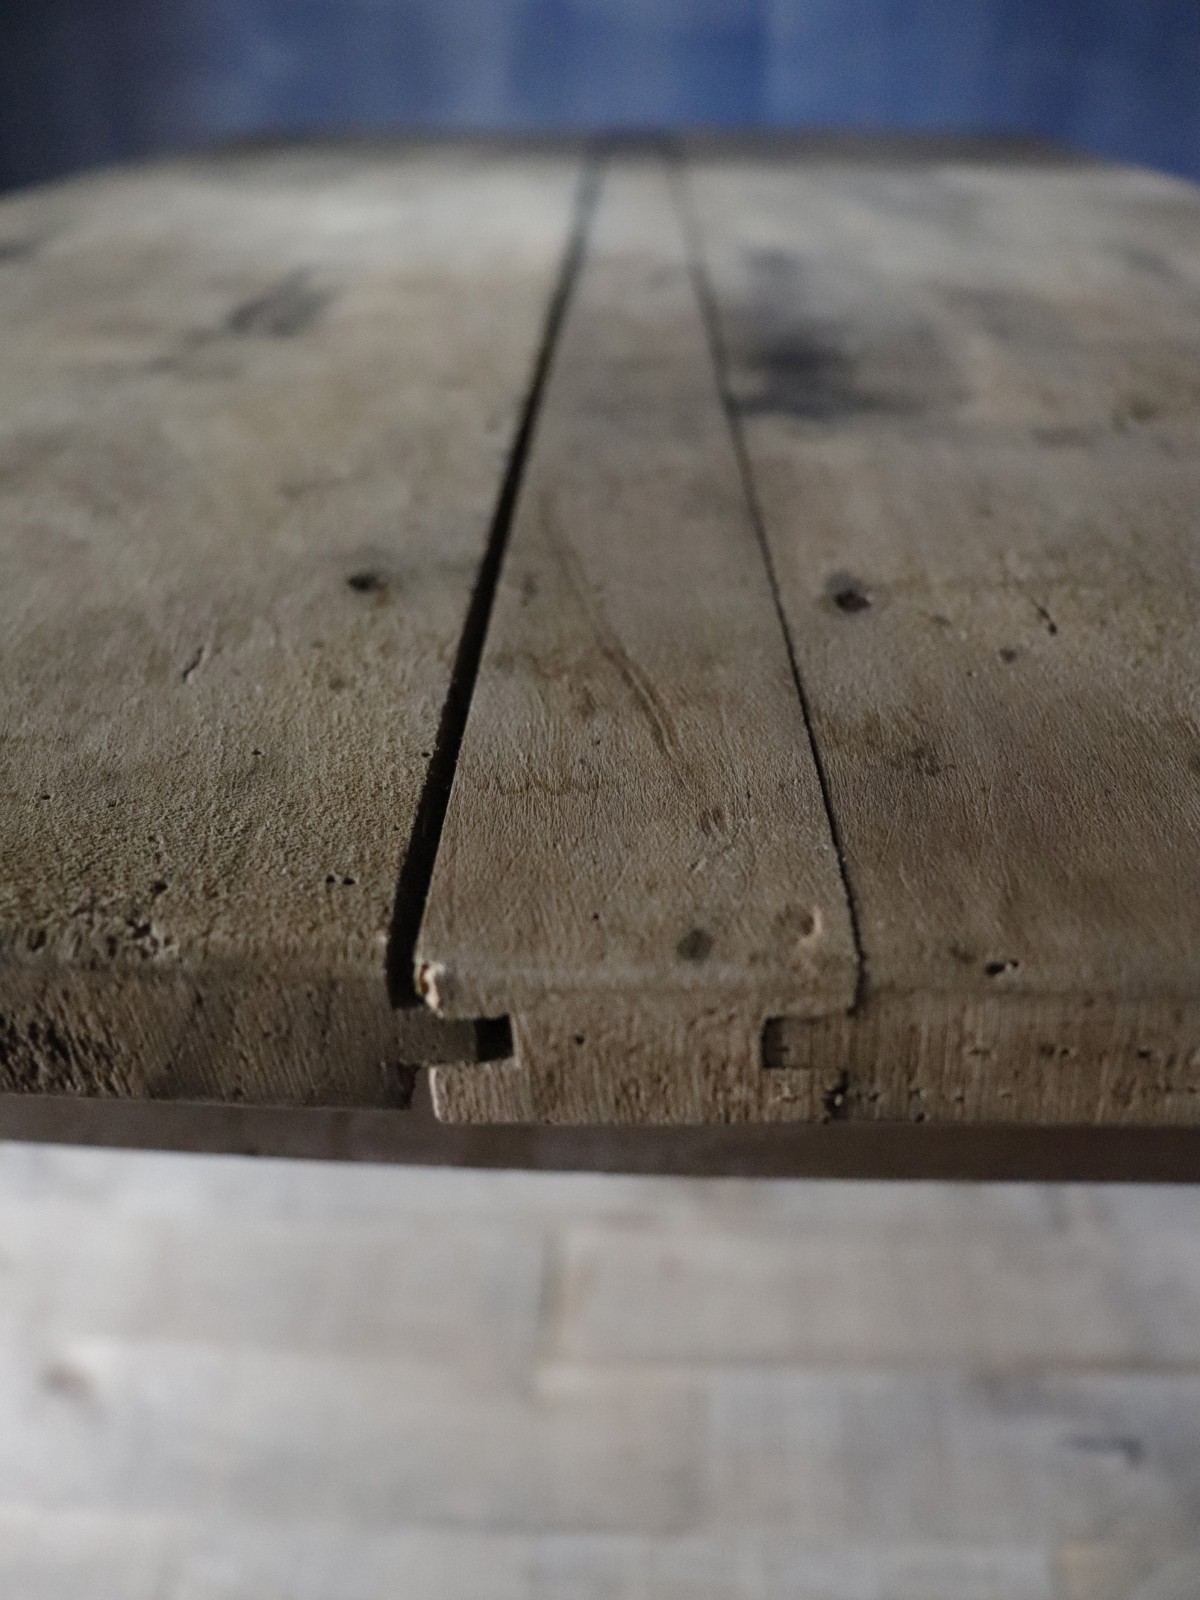 france, pine wood, table